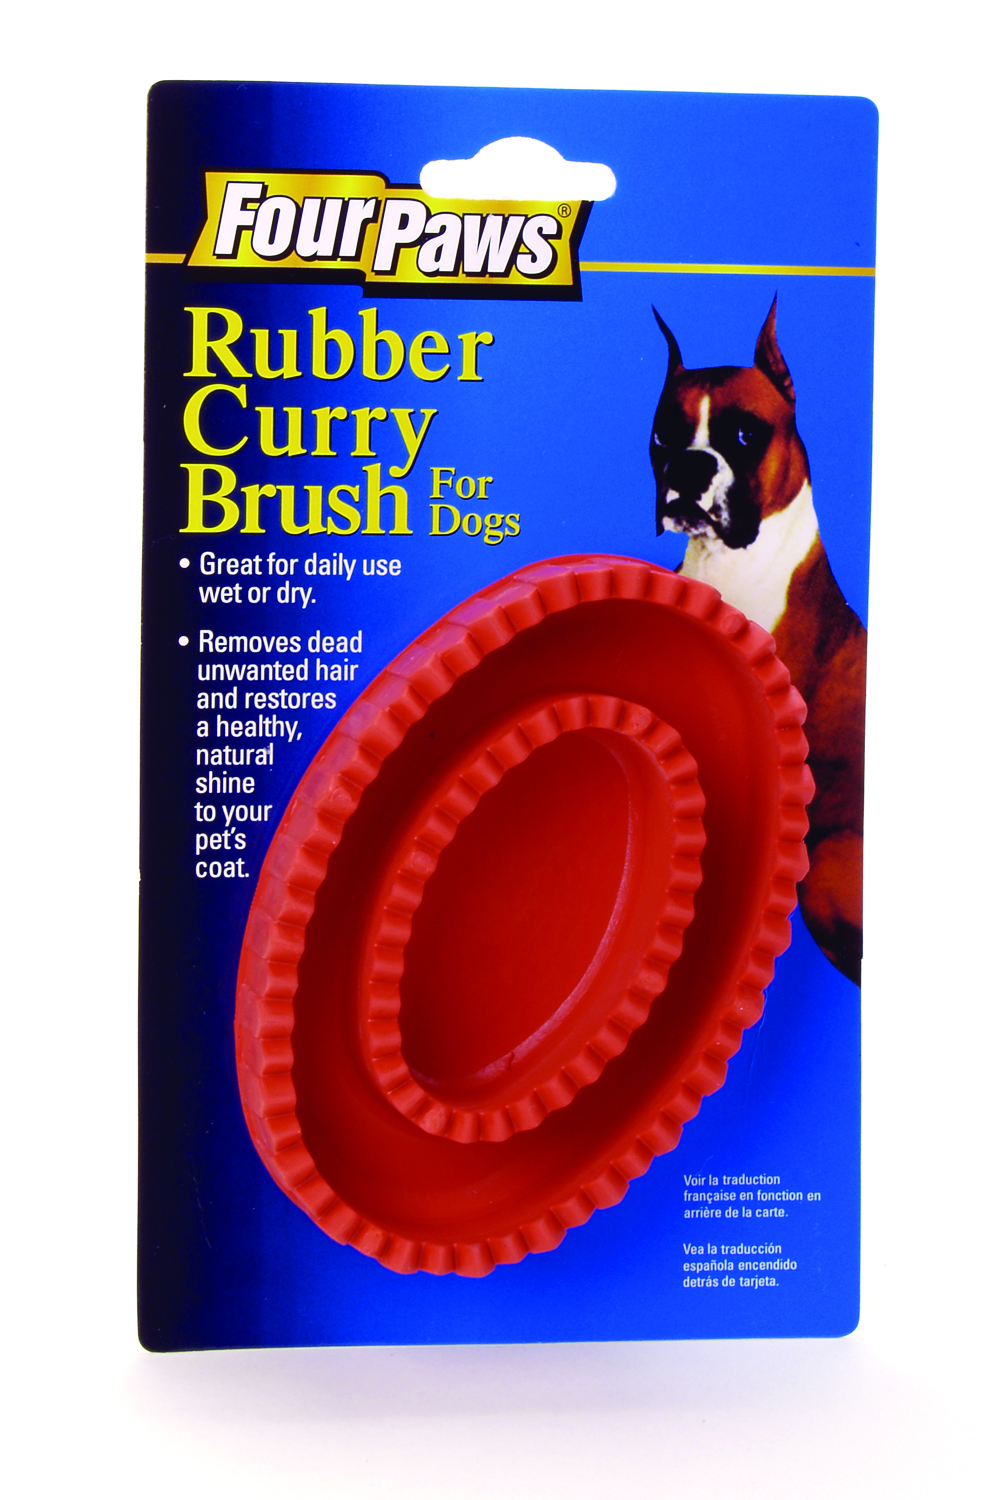 Rubber Curry Dog Brush